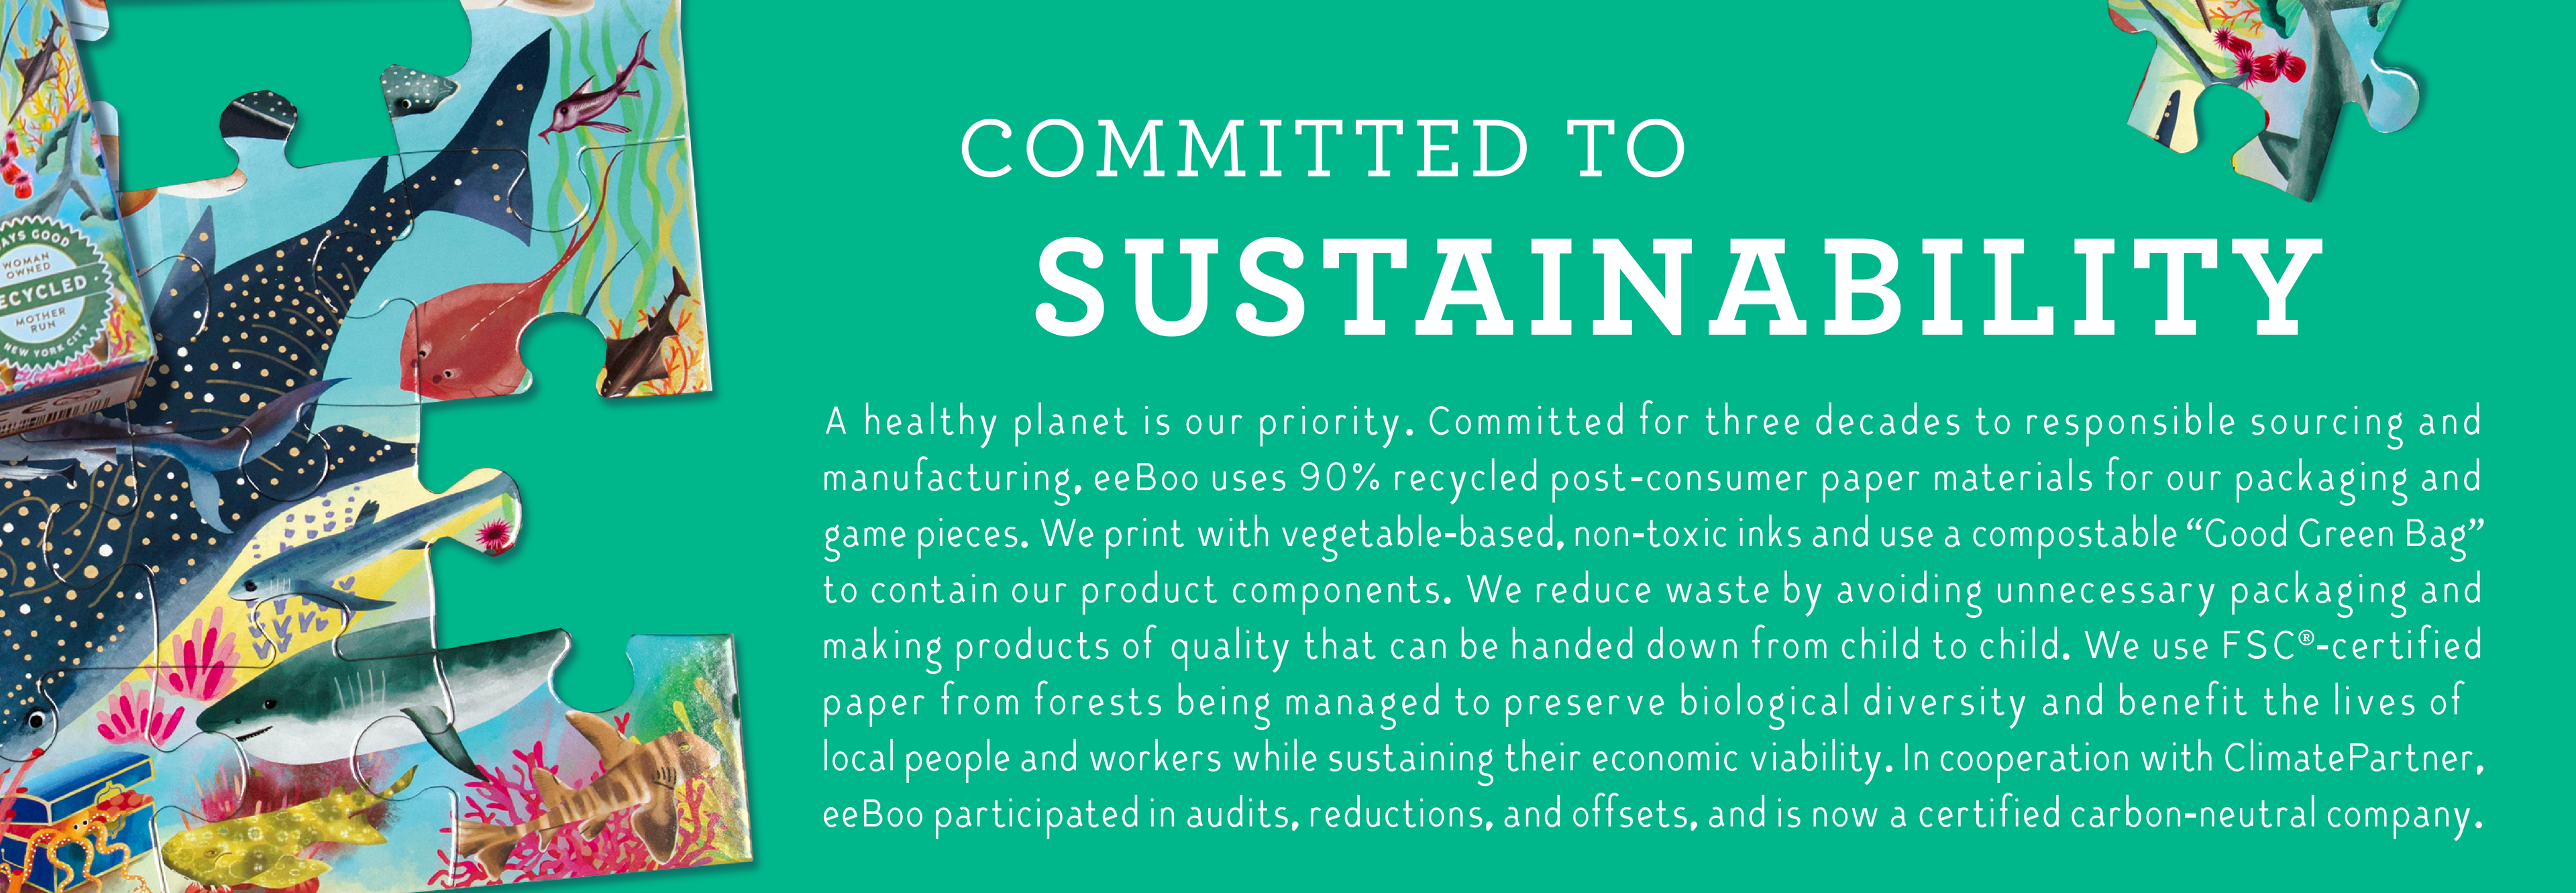 Committed to Sustainability 